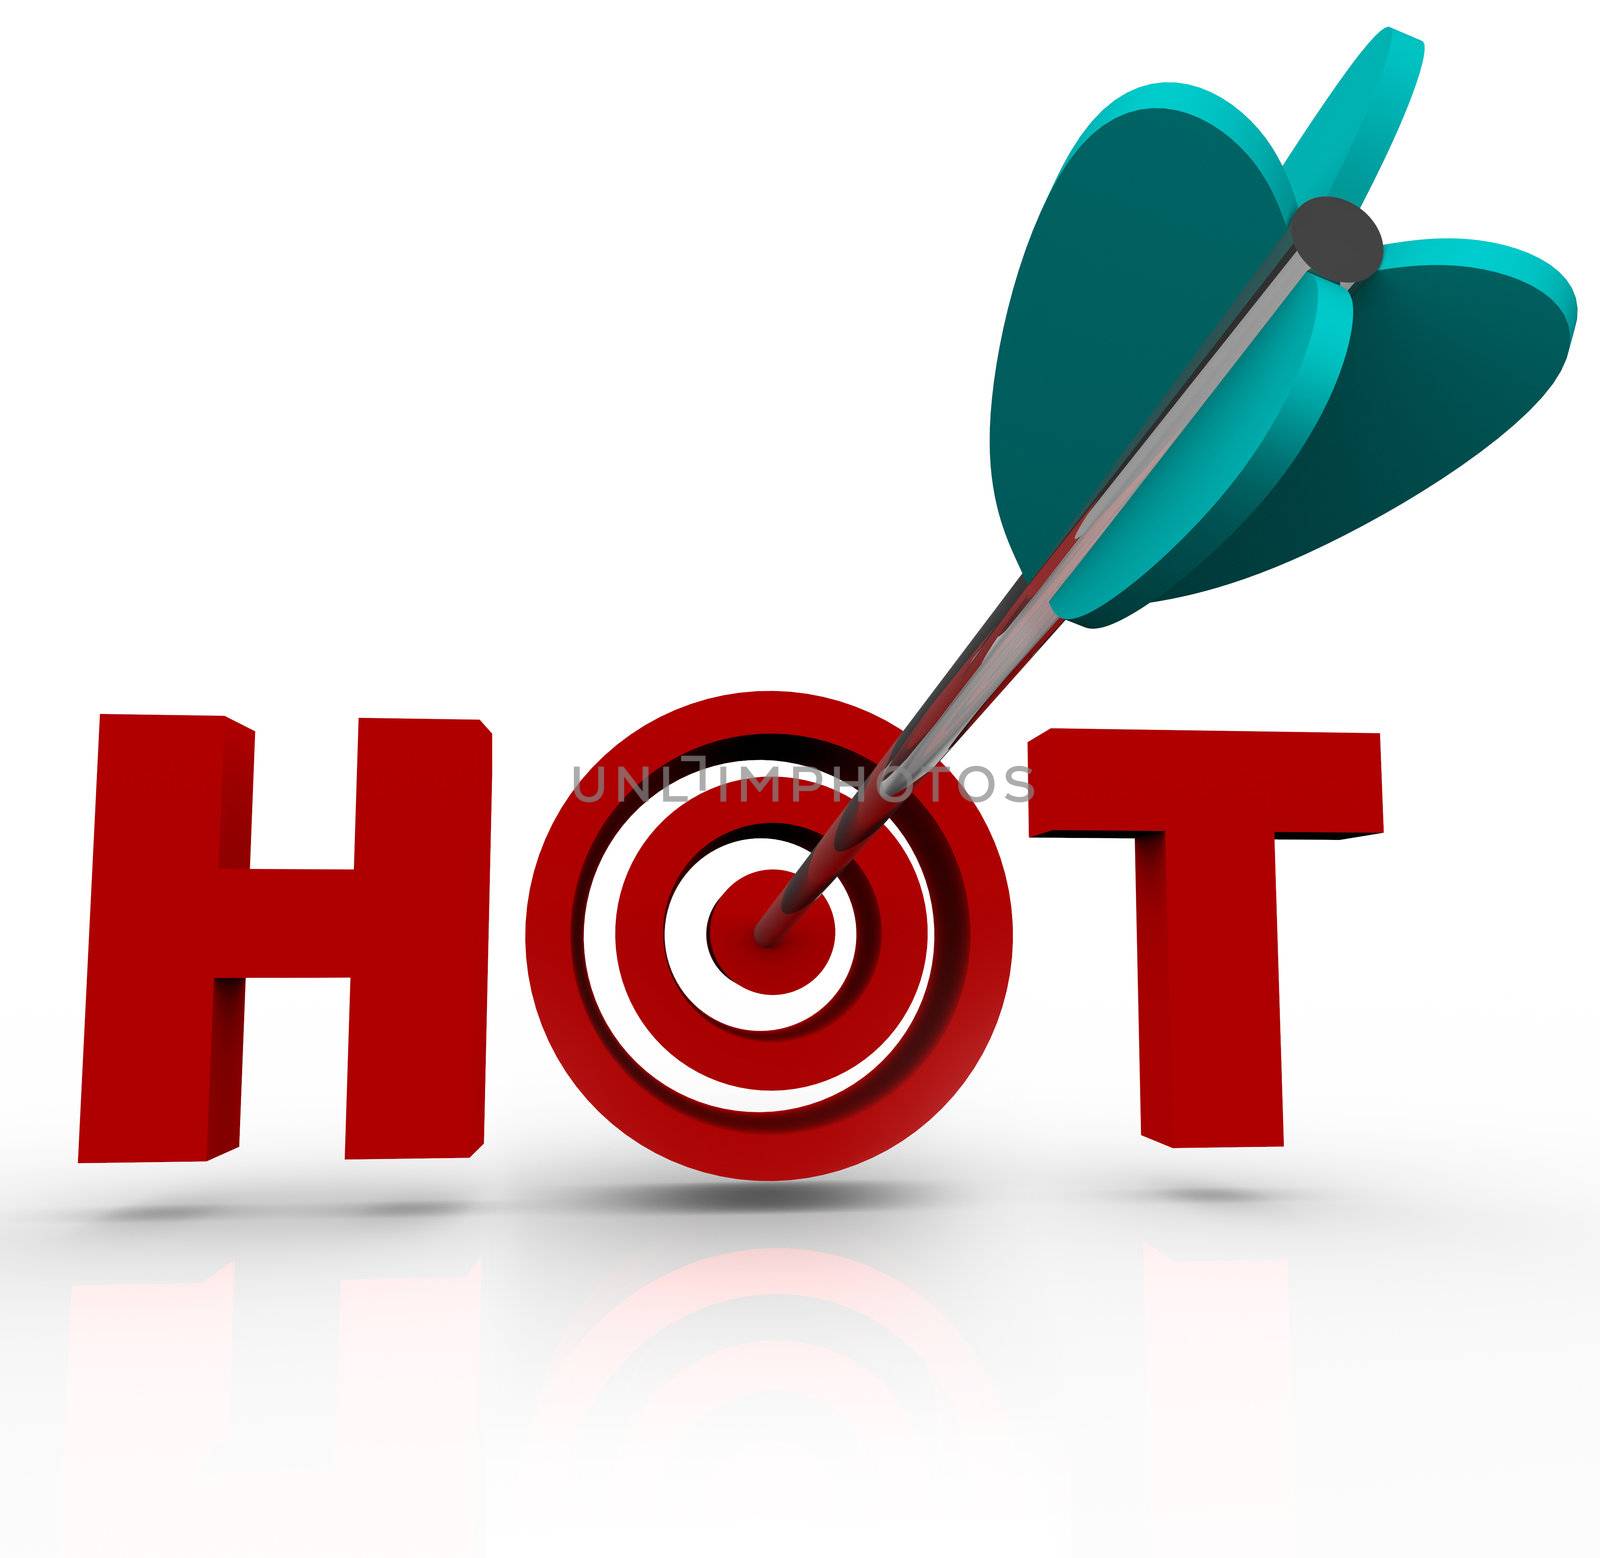 An arrow hits a bullseye in the word Hot representing your ability to target what is hot, trendy or buzz generating in business so you may succeed in attracting popularity or customers